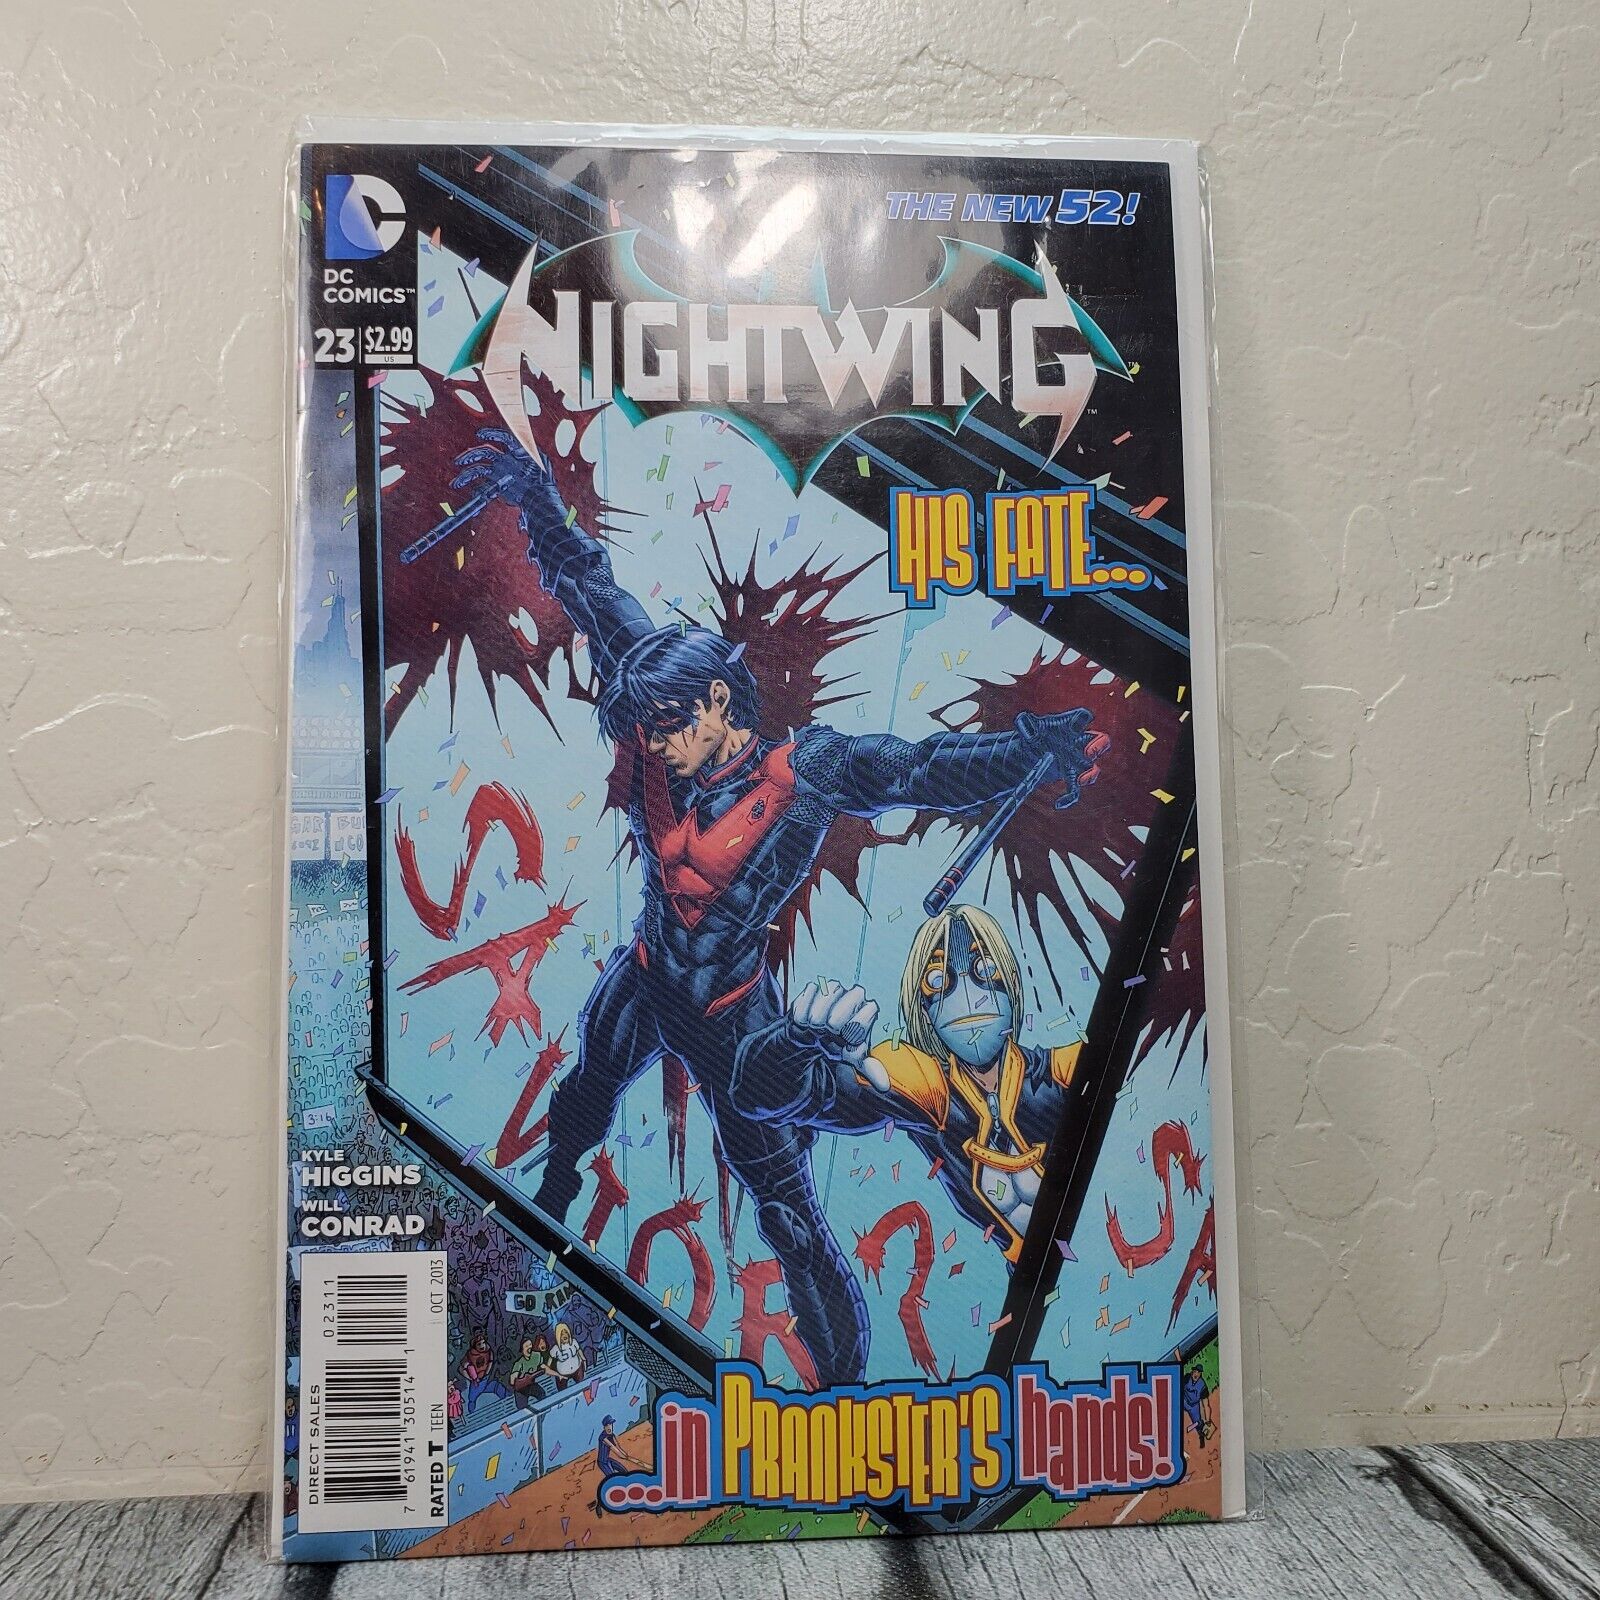 DC Comics The New 52 Nightwing #23 2013 Modern Comic Book Sleeved Boarded